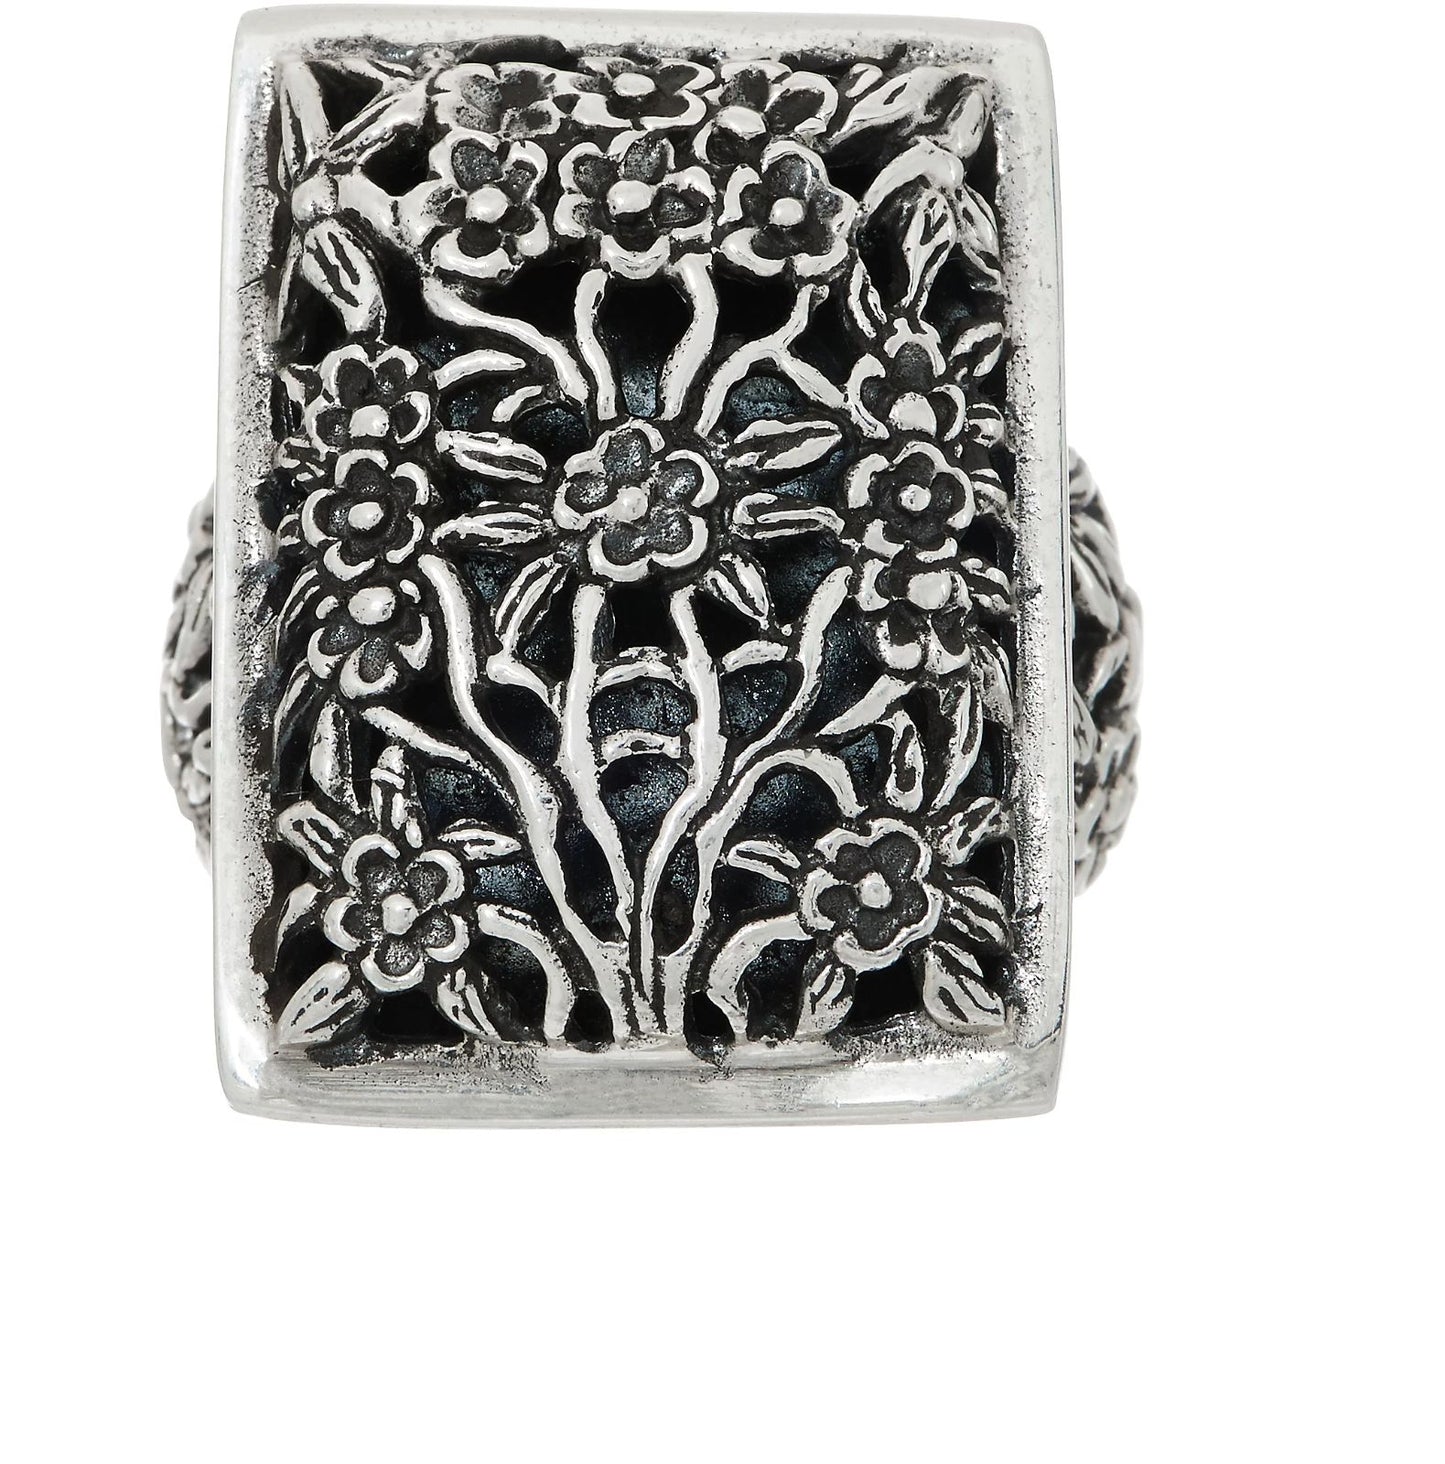 EXEX by Claudia Agudelo Sterling Silver Floral Design Ring. Size 7